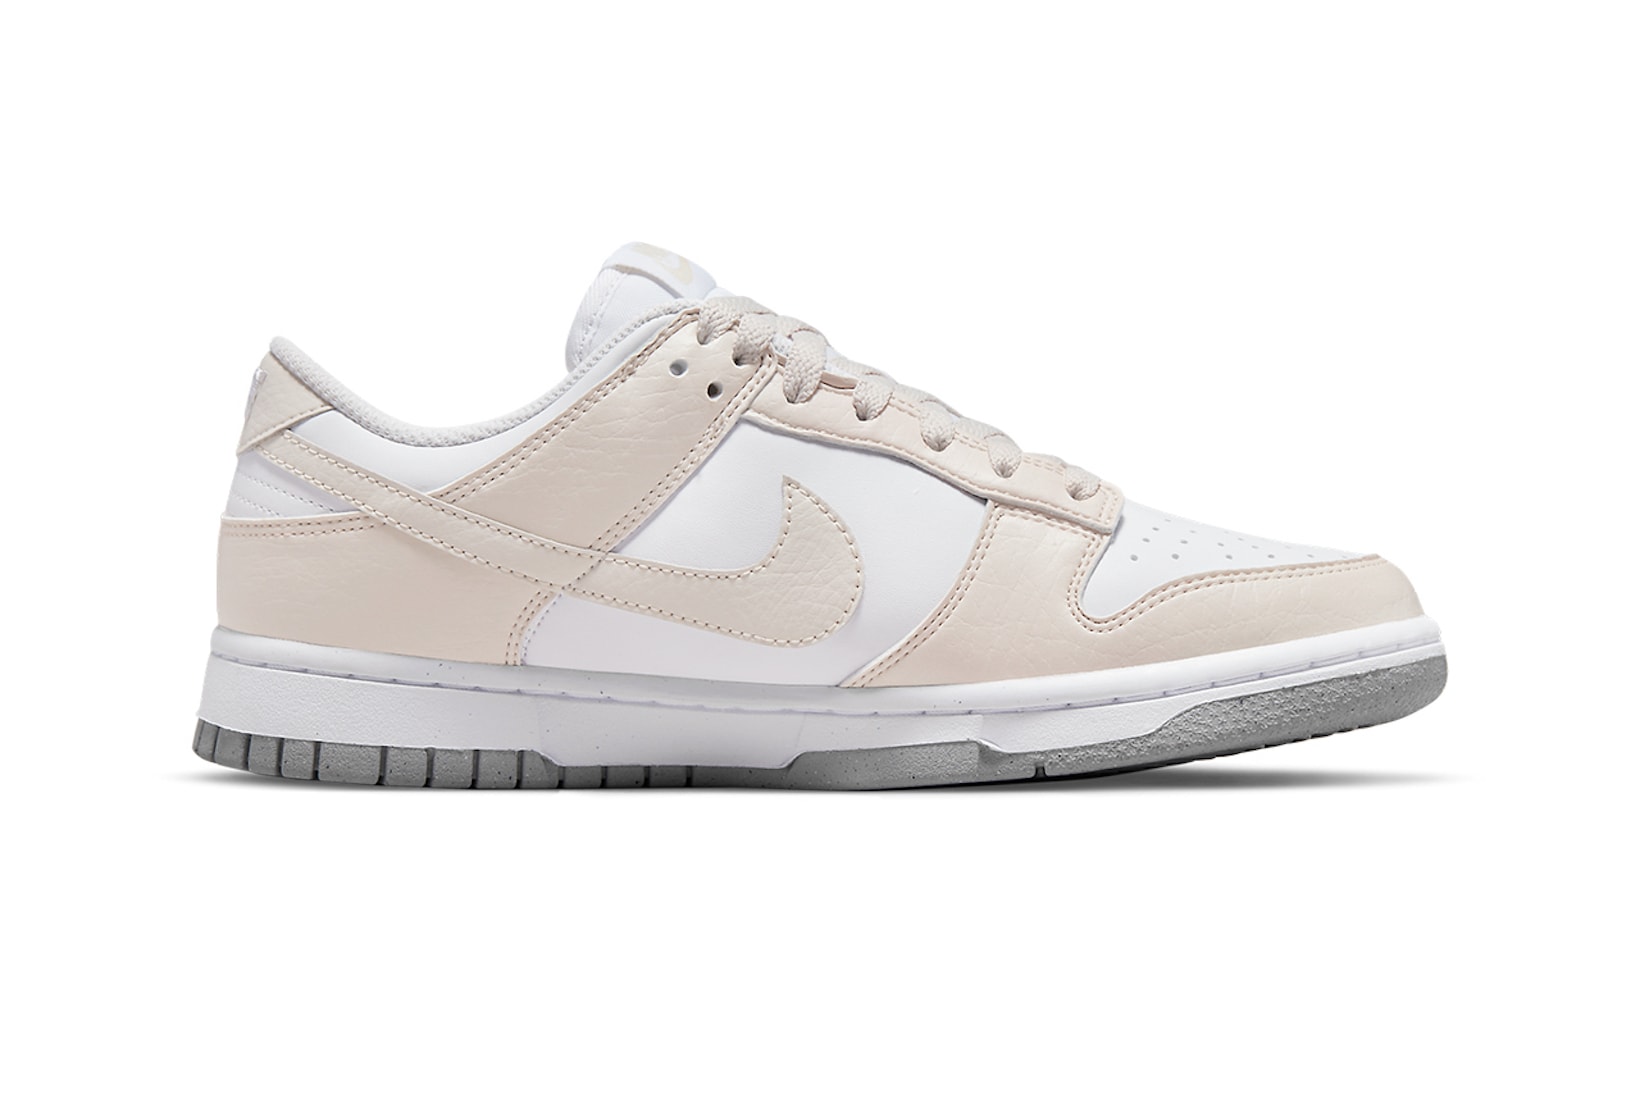 nike dunk low move to zero cream white gray sustainable footwear shoes kicks lateral